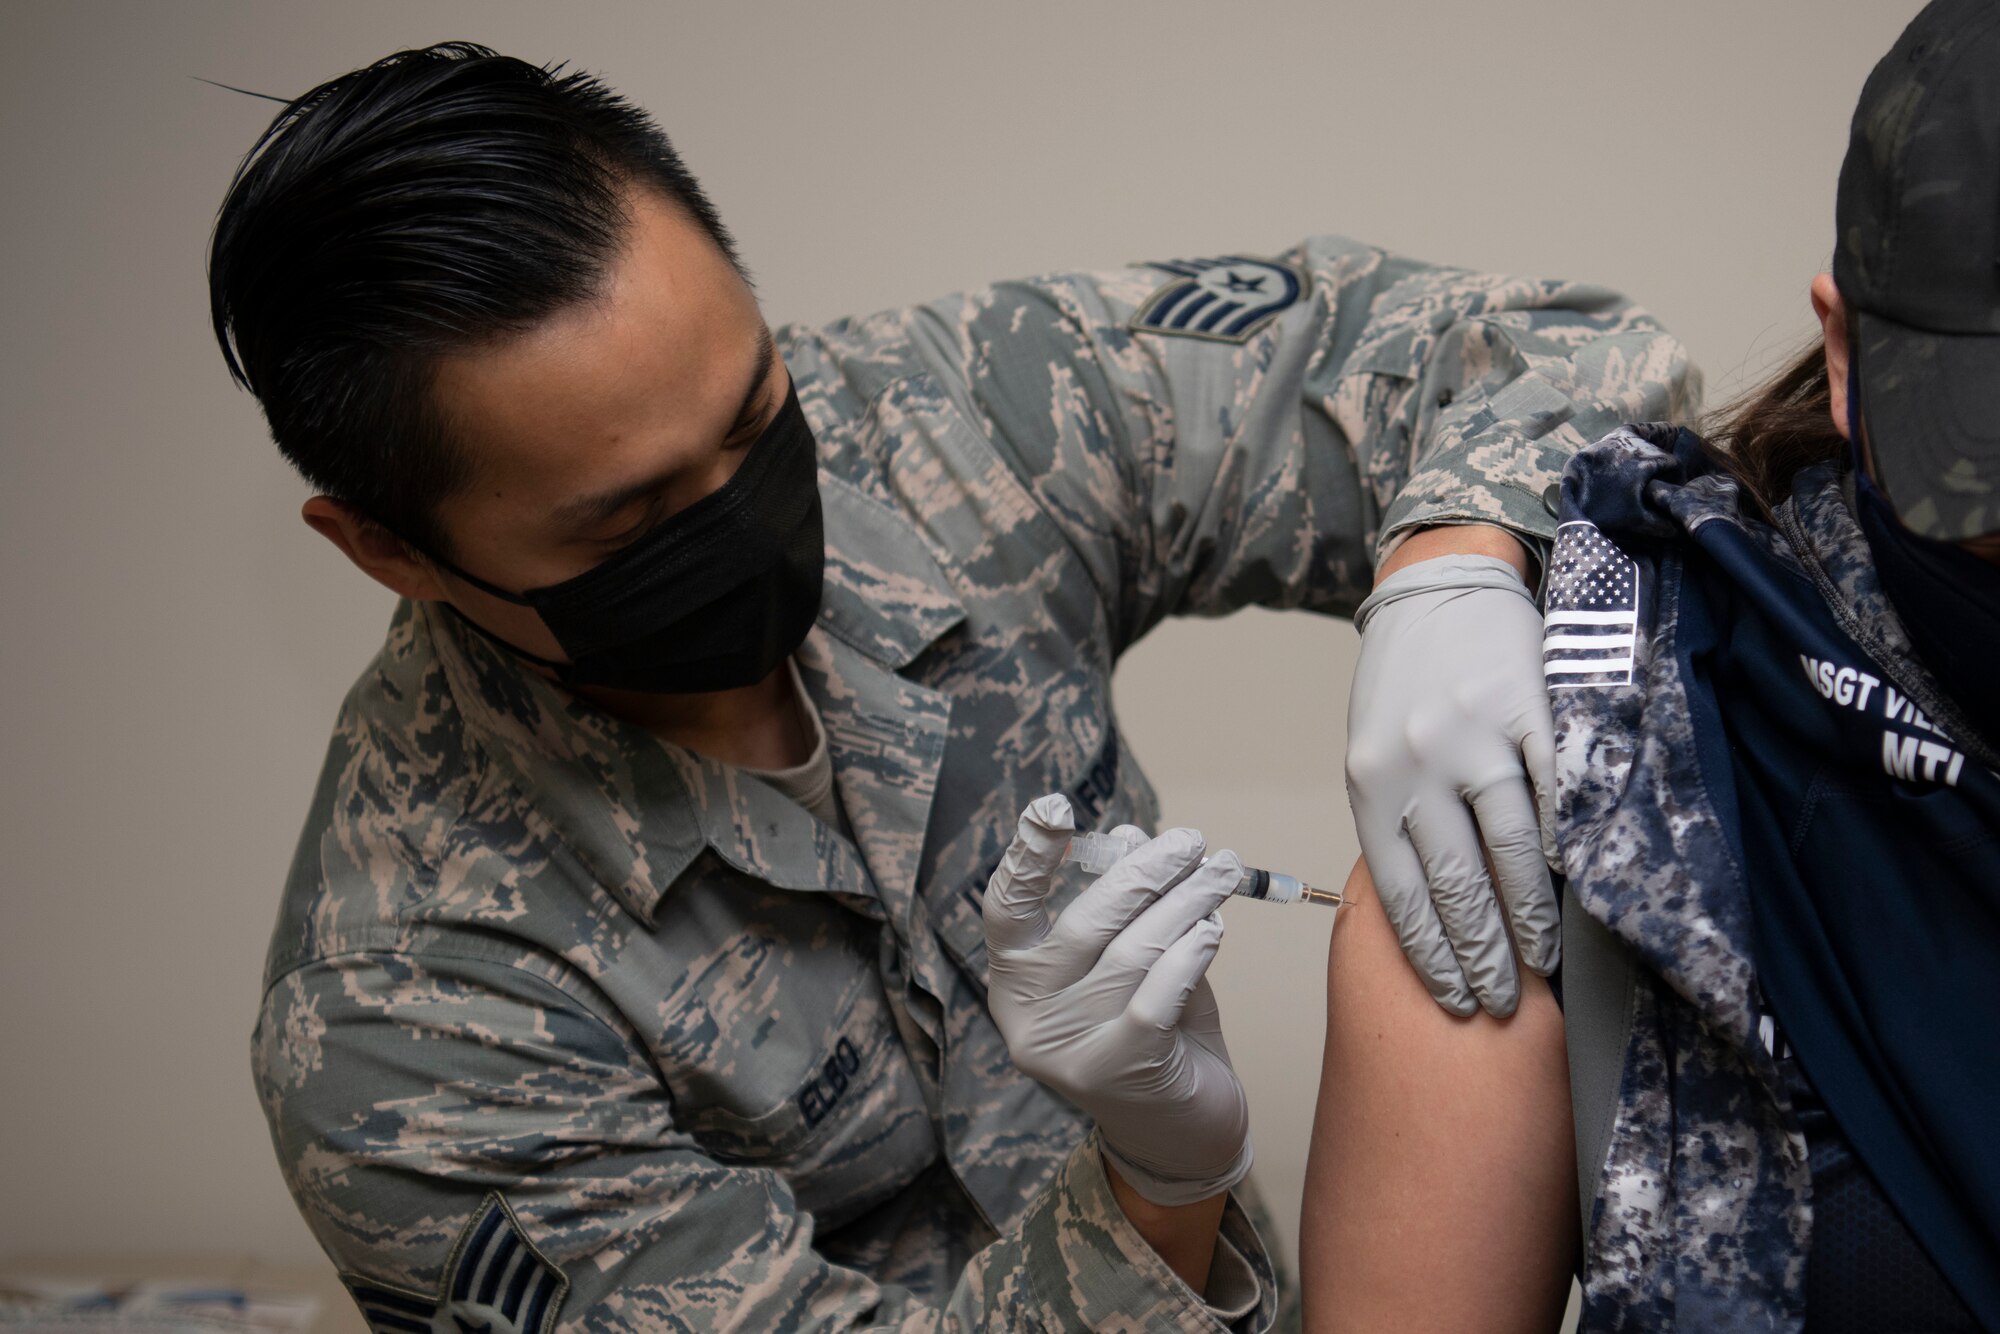 Staff Sgt. Michael Elbo, 509th Healthcare Operations Squadron NCO in charge of immunizations, administers a COVID-19 vaccine at Whiteman Air Force Base, Missouri, Dec. 30, 2020. The Whiteman AFB COVID-19 vaccine distribution and administration plan will implement a phased, standardized and coordinated strategy for prioritizing, distributing, and administering COVID-19 vaccines to installation personnel. (U.S. Air Force photo by Staff Sgt. Dylan Nuckolls)